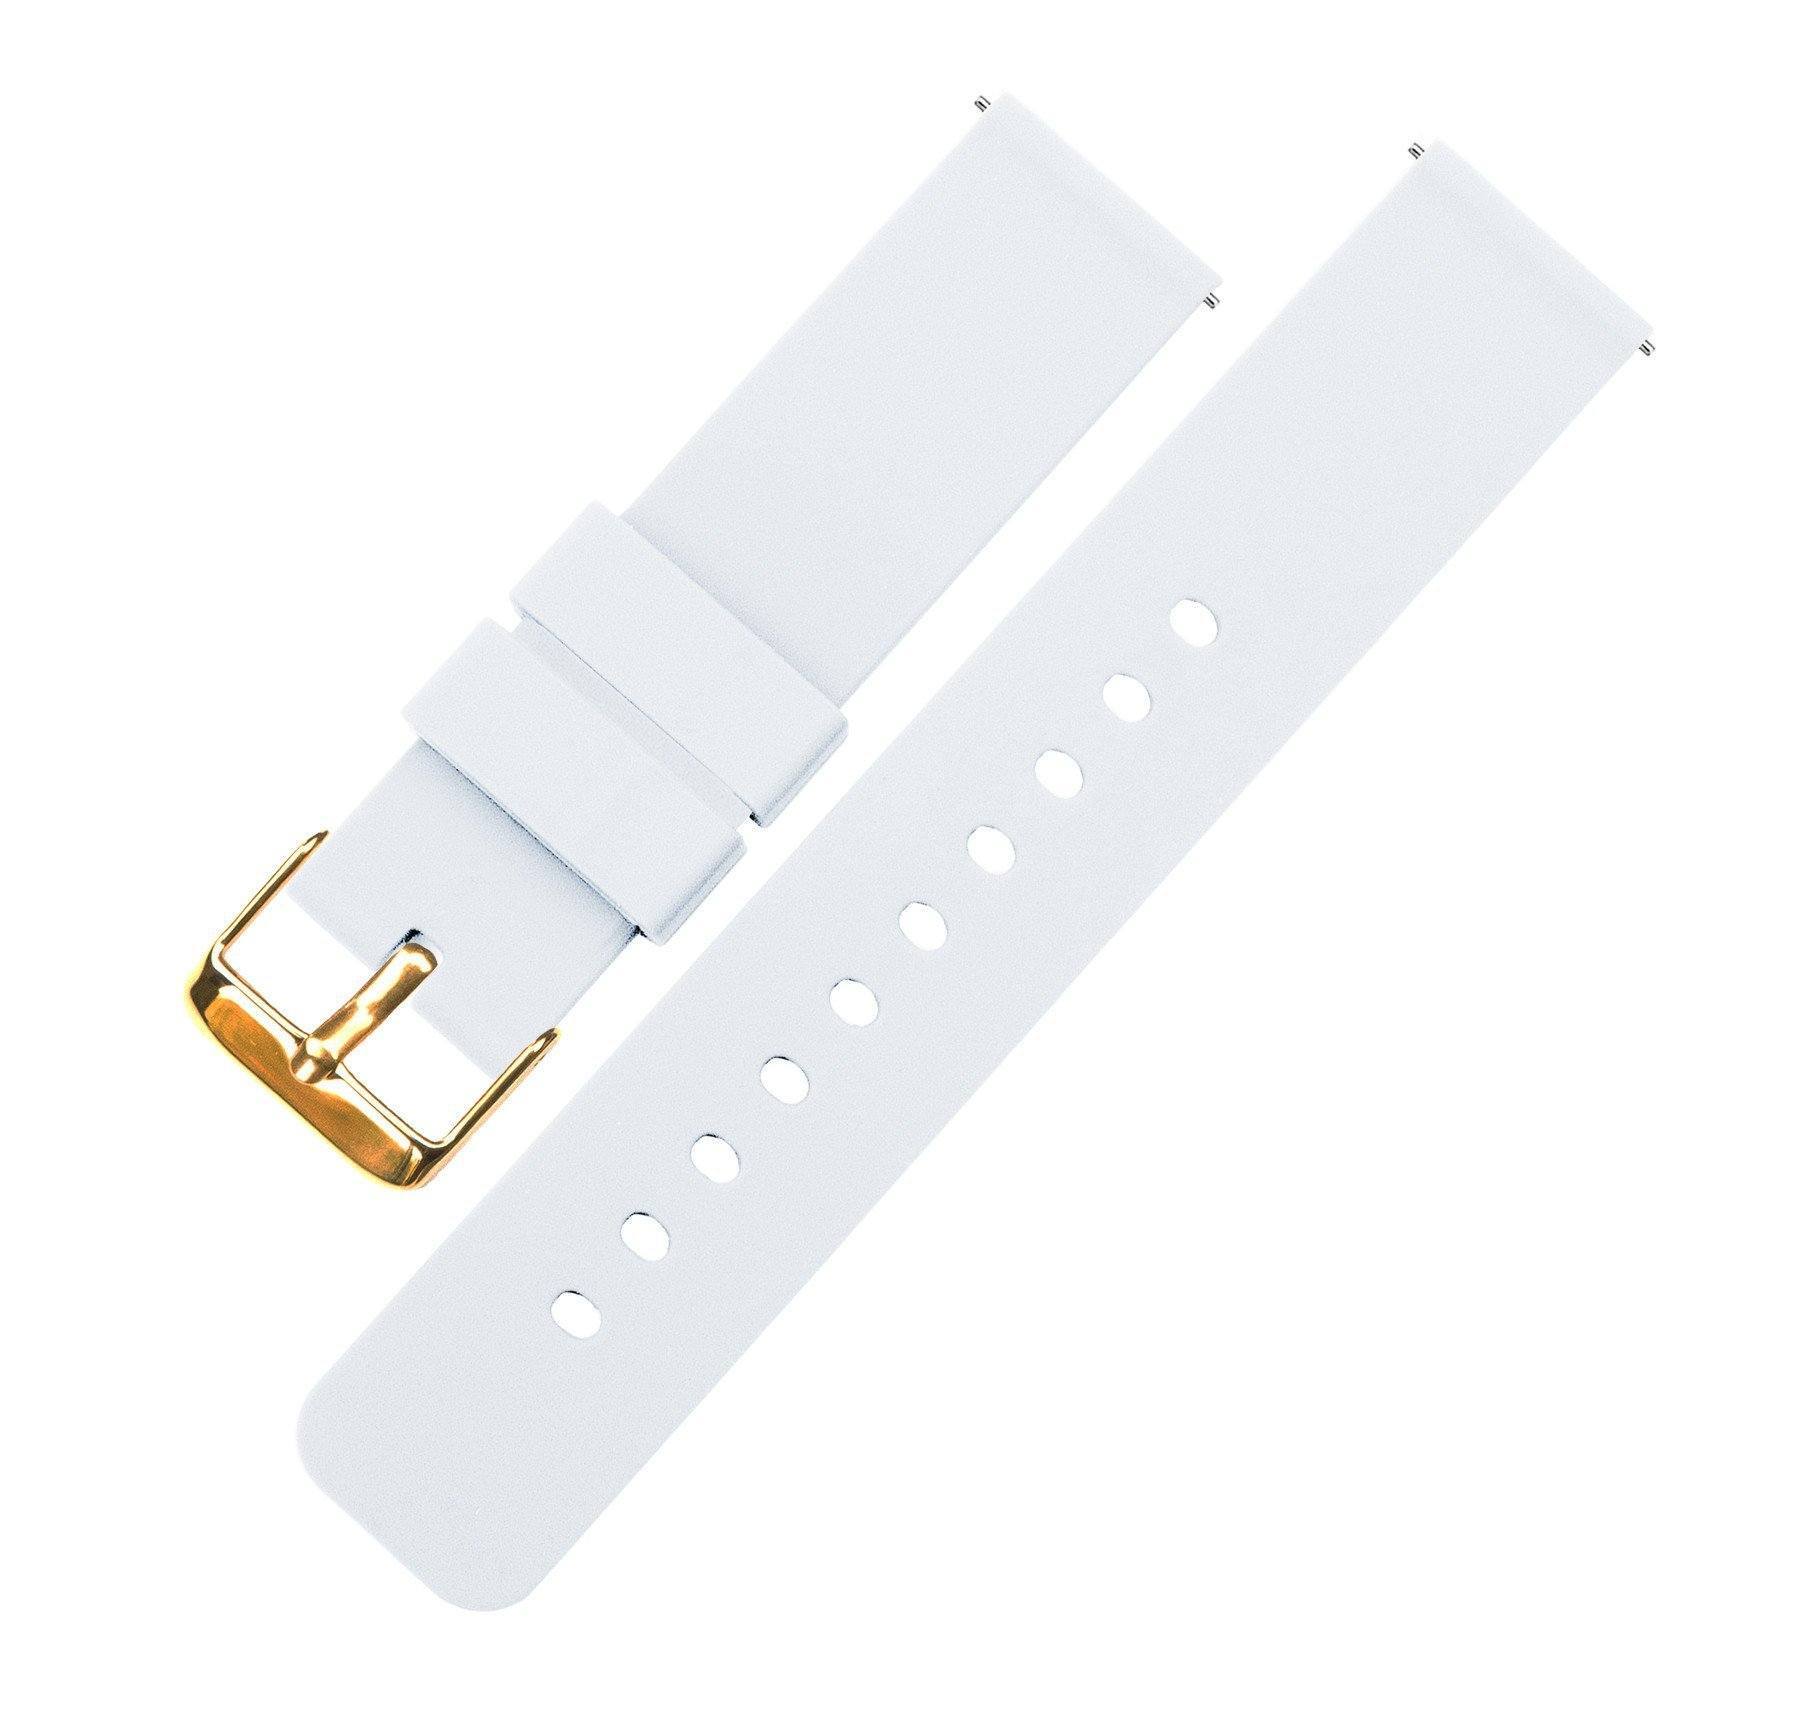 Artinian New Orleans Saints White Silicone Apple Watch Band